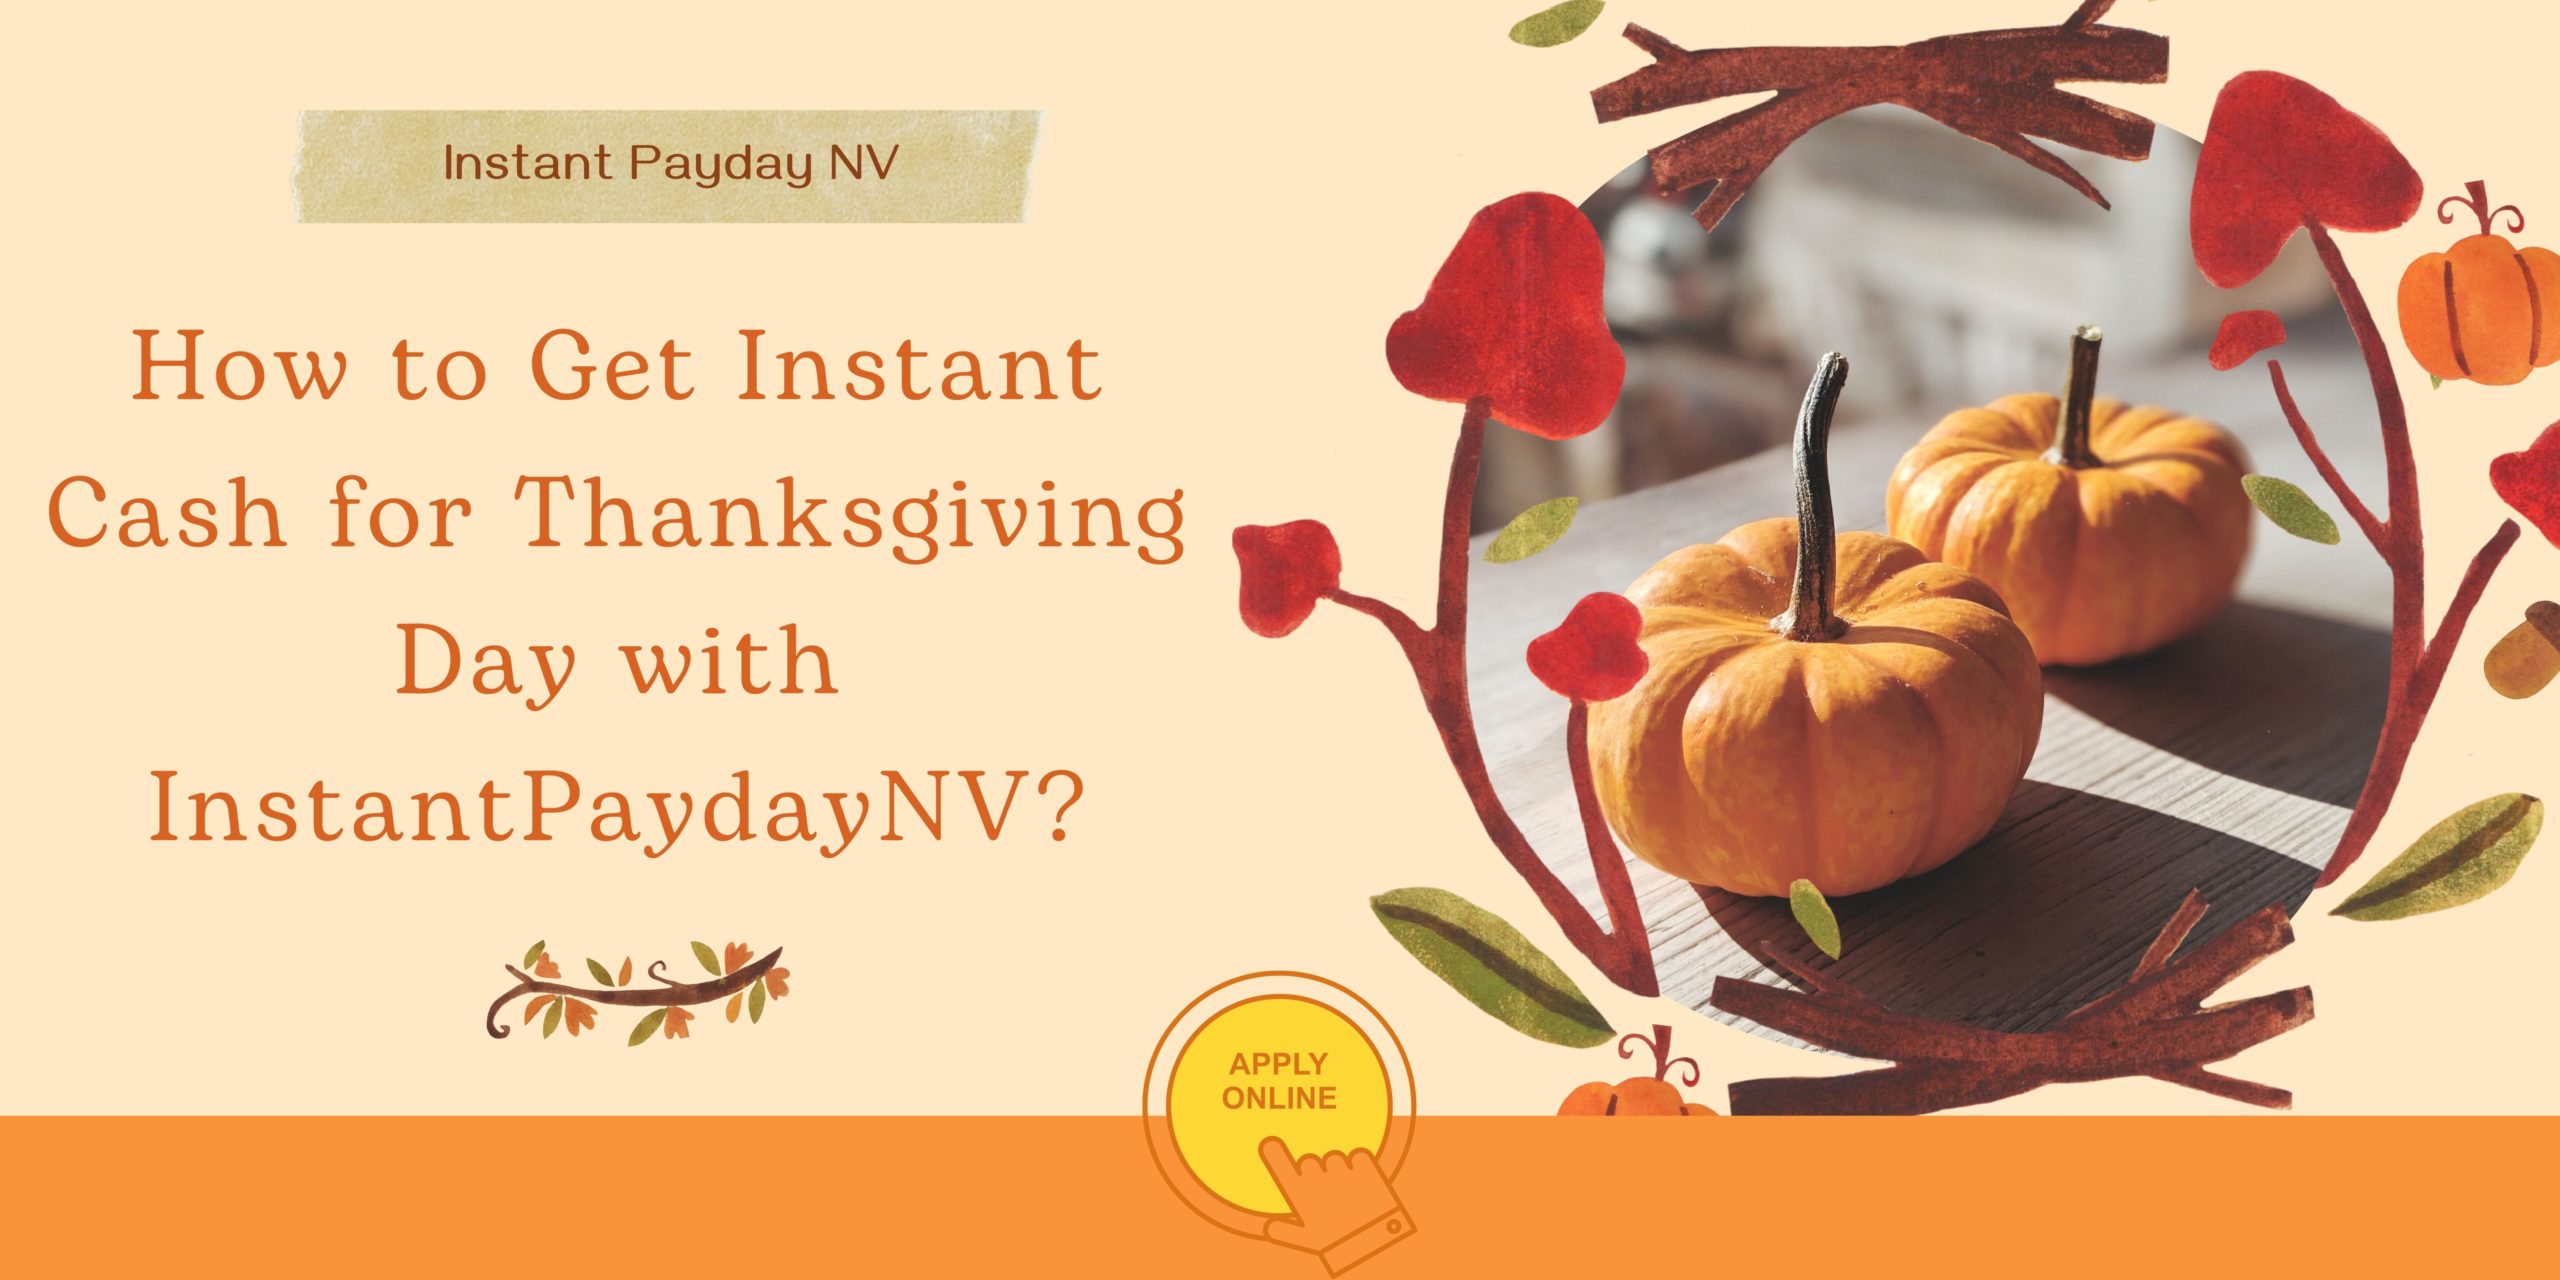 How to Get Instant Cash for Thanksgiving Day with InstantPaydayNV